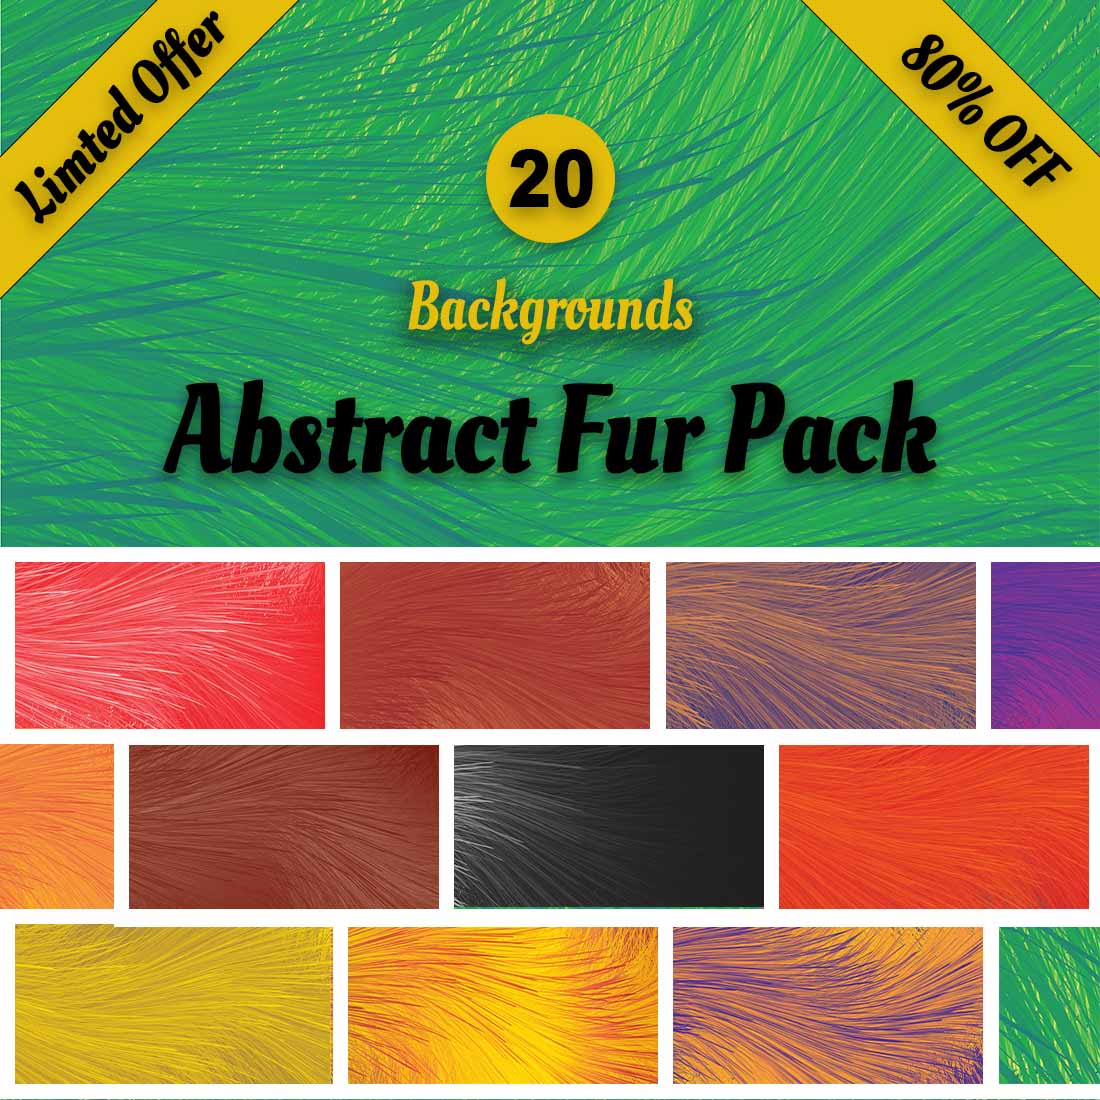 Abstract fur Background Pack cover image.